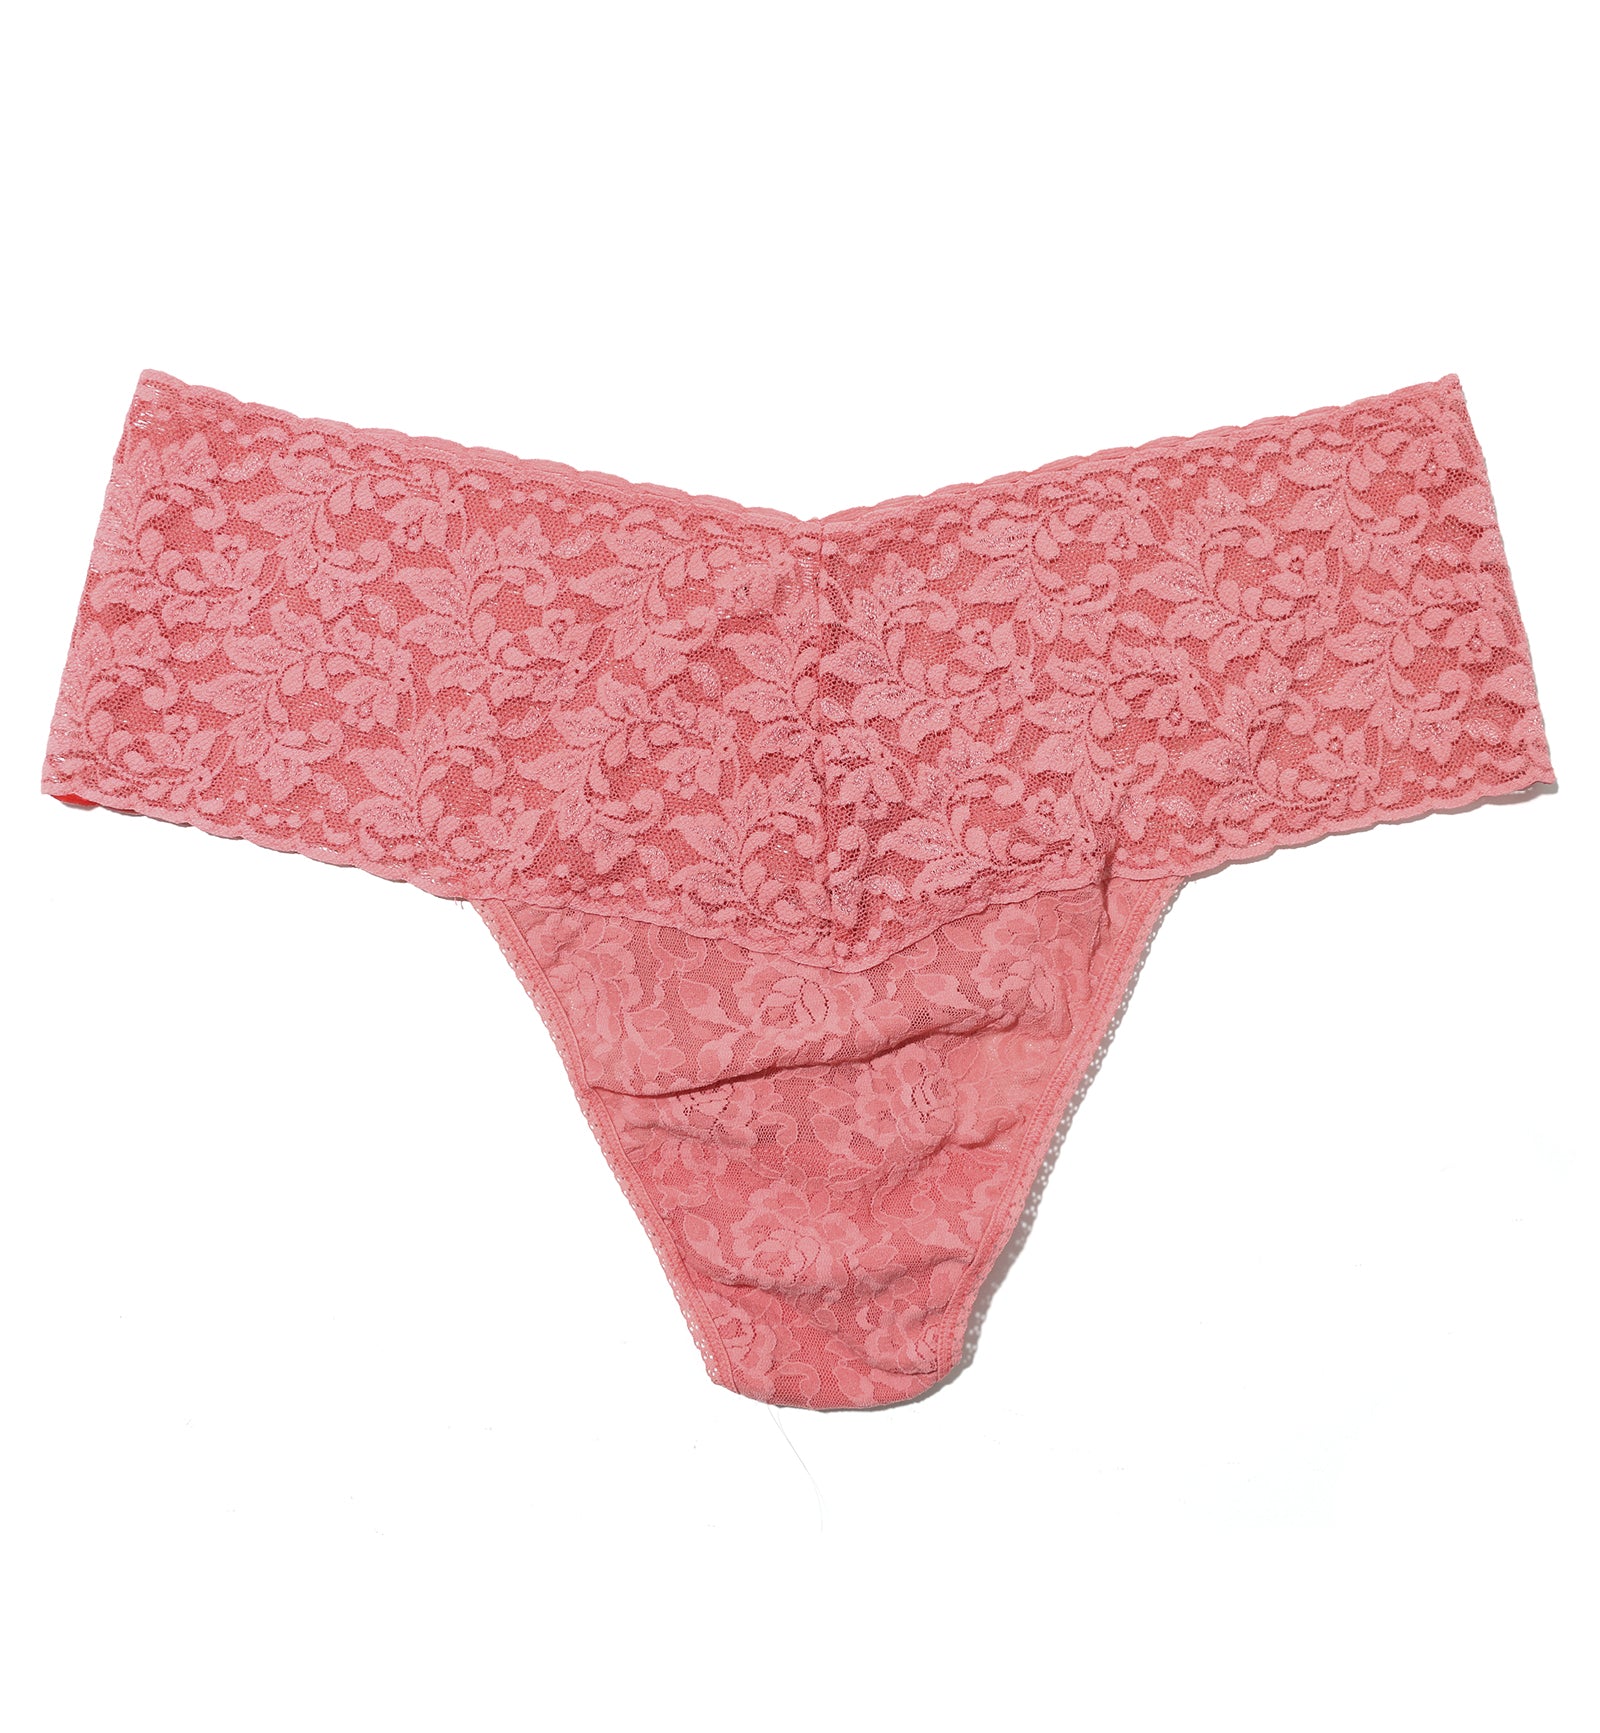 Hanky Panky High-Waist Retro Lace Thong PLUS (9K1926X),Guava Pink - Guava Pink,One Size